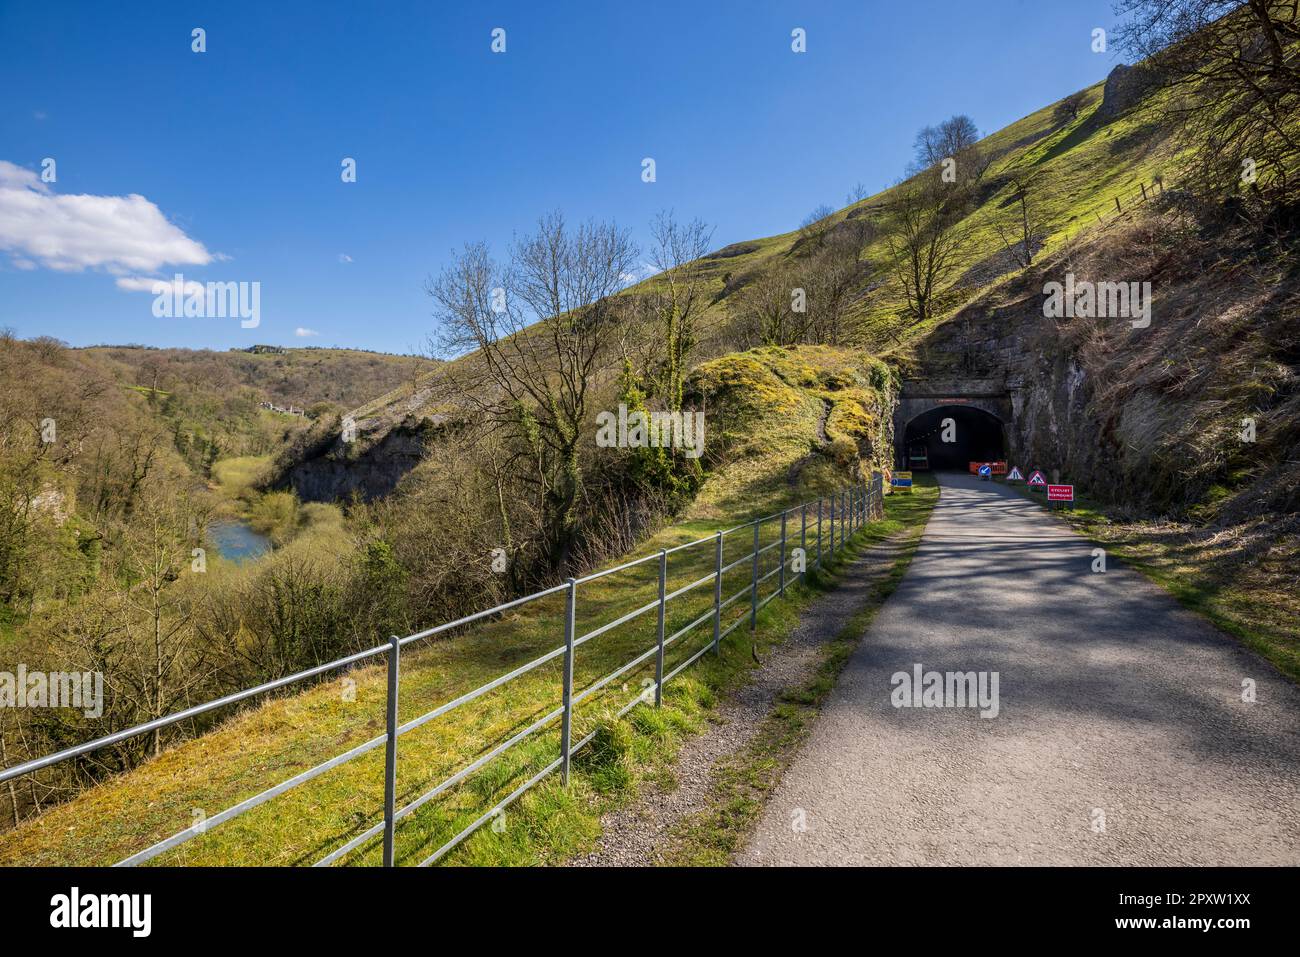 The entrance to the Cressbrook Tunnel on the Monsal Trail, Peak District National Park, Derbyshire, England Stock Photo